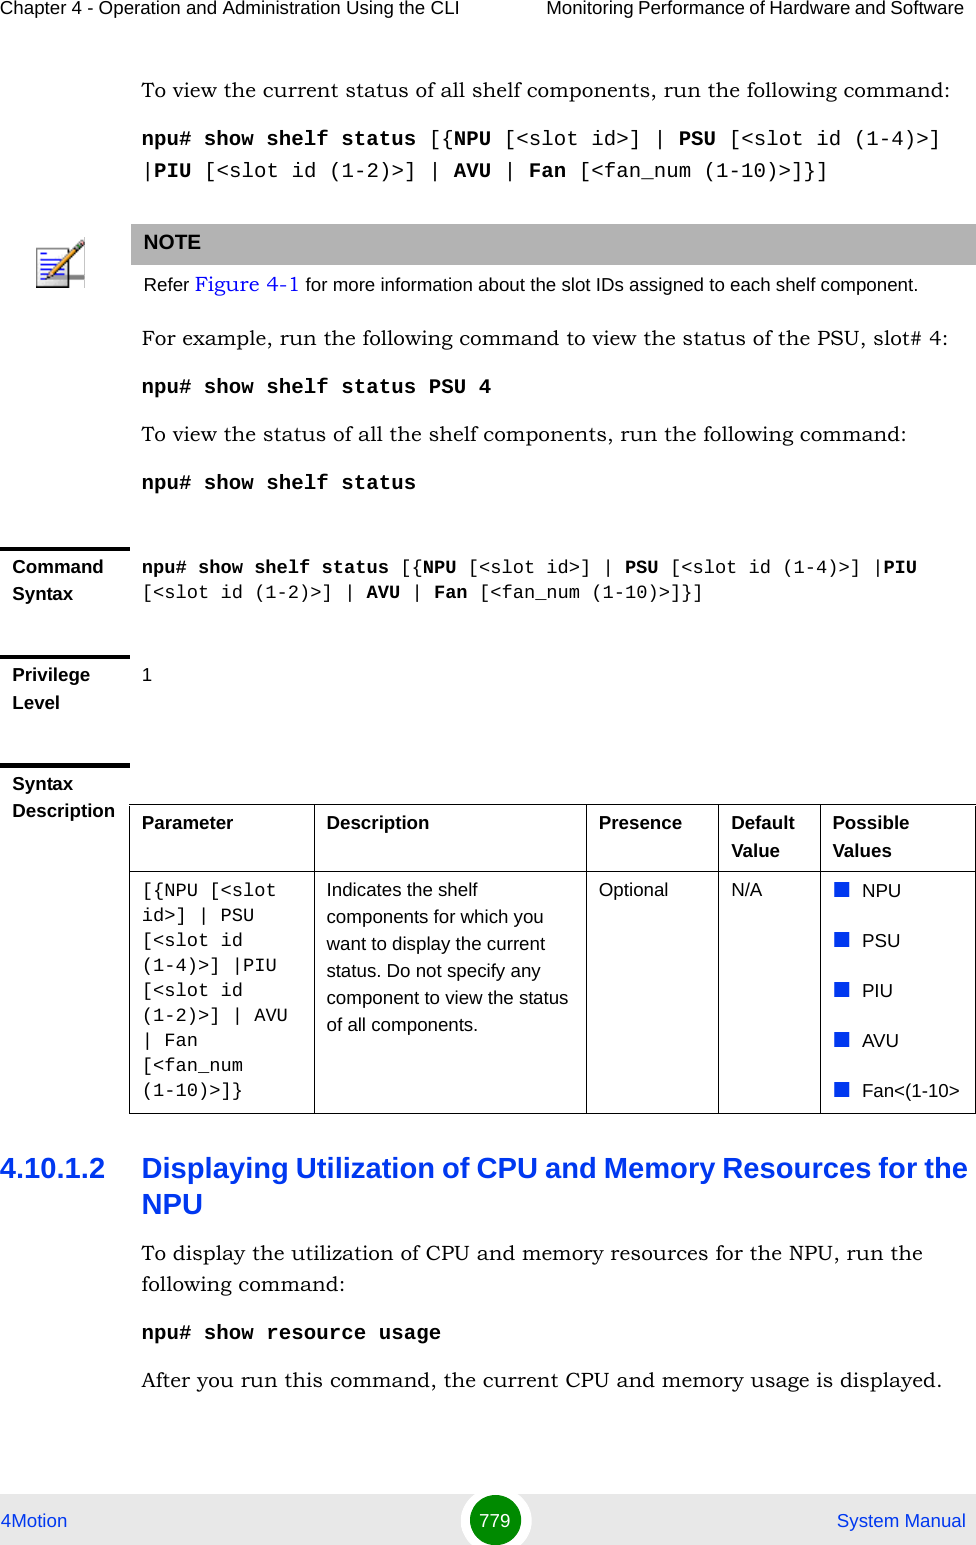 Chapter 4 - Operation and Administration Using the CLI Monitoring Performance of Hardware and Software 4Motion 779  System ManualTo view the current status of all shelf components, run the following command:npu# show shelf status [{NPU [&lt;slot id&gt;] | PSU [&lt;slot id (1-4)&gt;] |PIU [&lt;slot id (1-2)&gt;] | AVU | Fan [&lt;fan_num (1-10)&gt;]}]For example, run the following command to view the status of the PSU, slot# 4:npu# show shelf status PSU 4To view the status of all the shelf components, run the following command:npu# show shelf status4.10.1.2 Displaying Utilization of CPU and Memory Resources for the NPUTo display the utilization of CPU and memory resources for the NPU, run the following command:npu# show resource usageAfter you run this command, the current CPU and memory usage is displayed.NOTERefer Figure 4-1 for more information about the slot IDs assigned to each shelf component.Command Syntaxnpu# show shelf status [{NPU [&lt;slot id&gt;] | PSU [&lt;slot id (1-4)&gt;] |PIU [&lt;slot id (1-2)&gt;] | AVU | Fan [&lt;fan_num (1-10)&gt;]}]Privilege Level1Syntax Description Parameter Description Presence Default ValuePossible Values[{NPU [&lt;slot id&gt;] | PSU [&lt;slot id (1-4)&gt;] |PIU [&lt;slot id (1-2)&gt;] | AVU | Fan [&lt;fan_num (1-10)&gt;]}Indicates the shelf components for which you want to display the current status. Do not specify any component to view the status of all components.Optional N/A NPUPSUPIUAVUFan&lt;(1-10&gt;